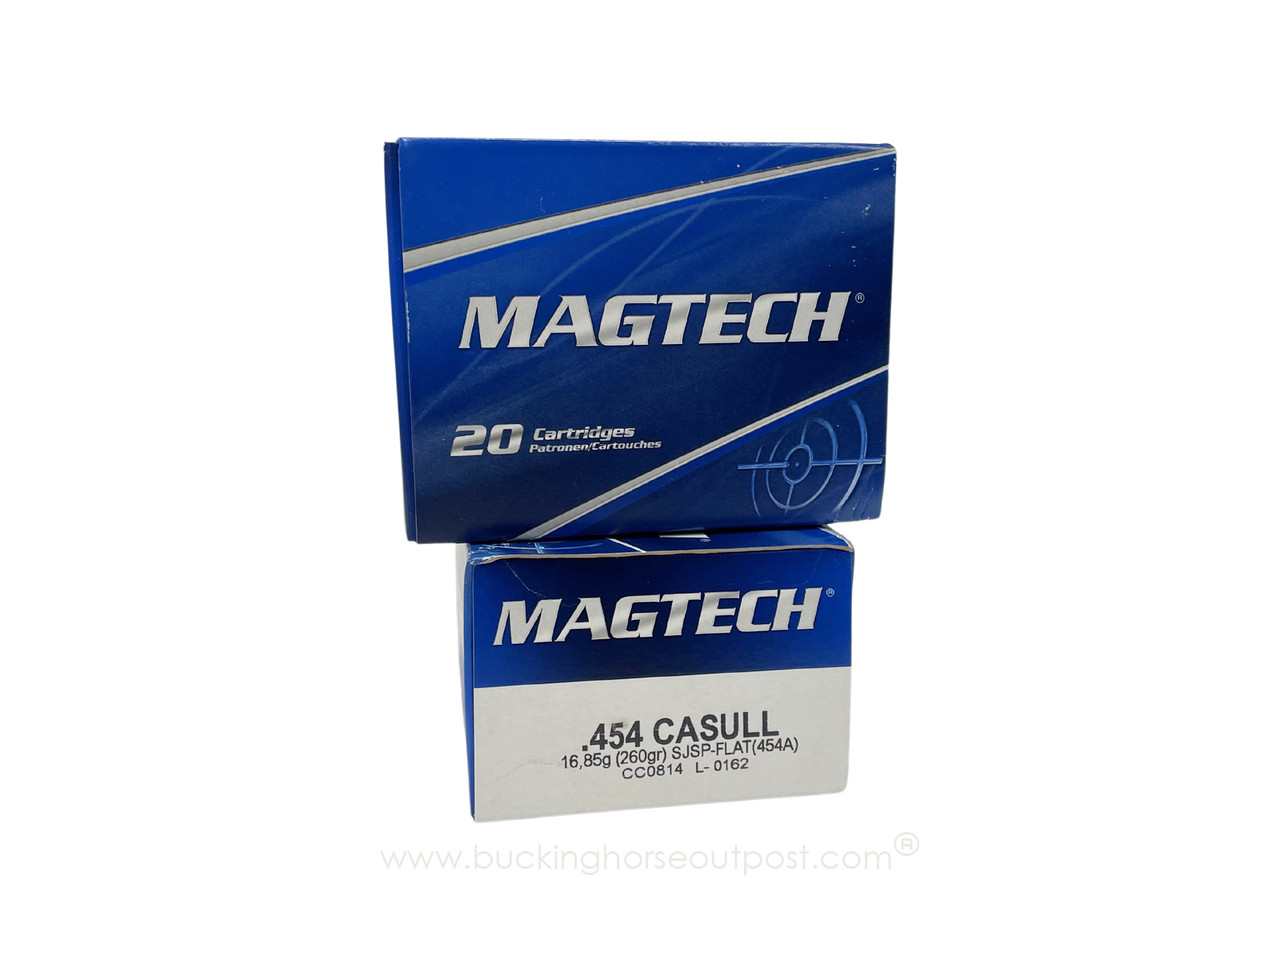 Magtech .454 Casull 260 Grain Semi-Jacketed Soft Point 20rds Per Box (454A) - FREE SHIPPING ON ORDERS OVER $175